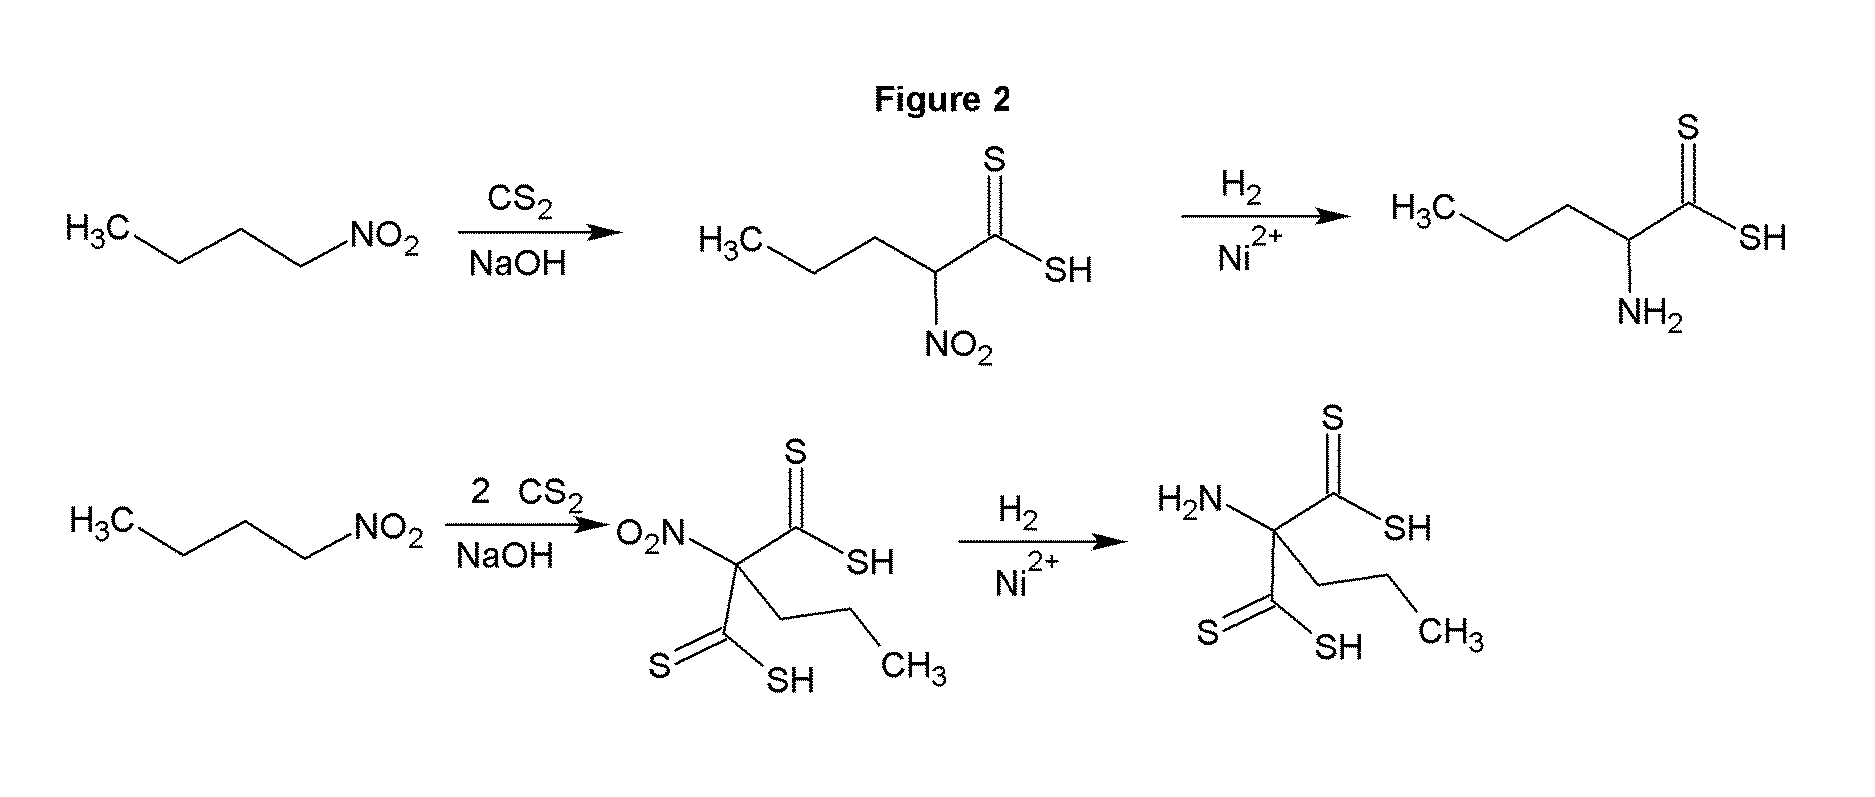 Carbondisulfide derived zwitterions